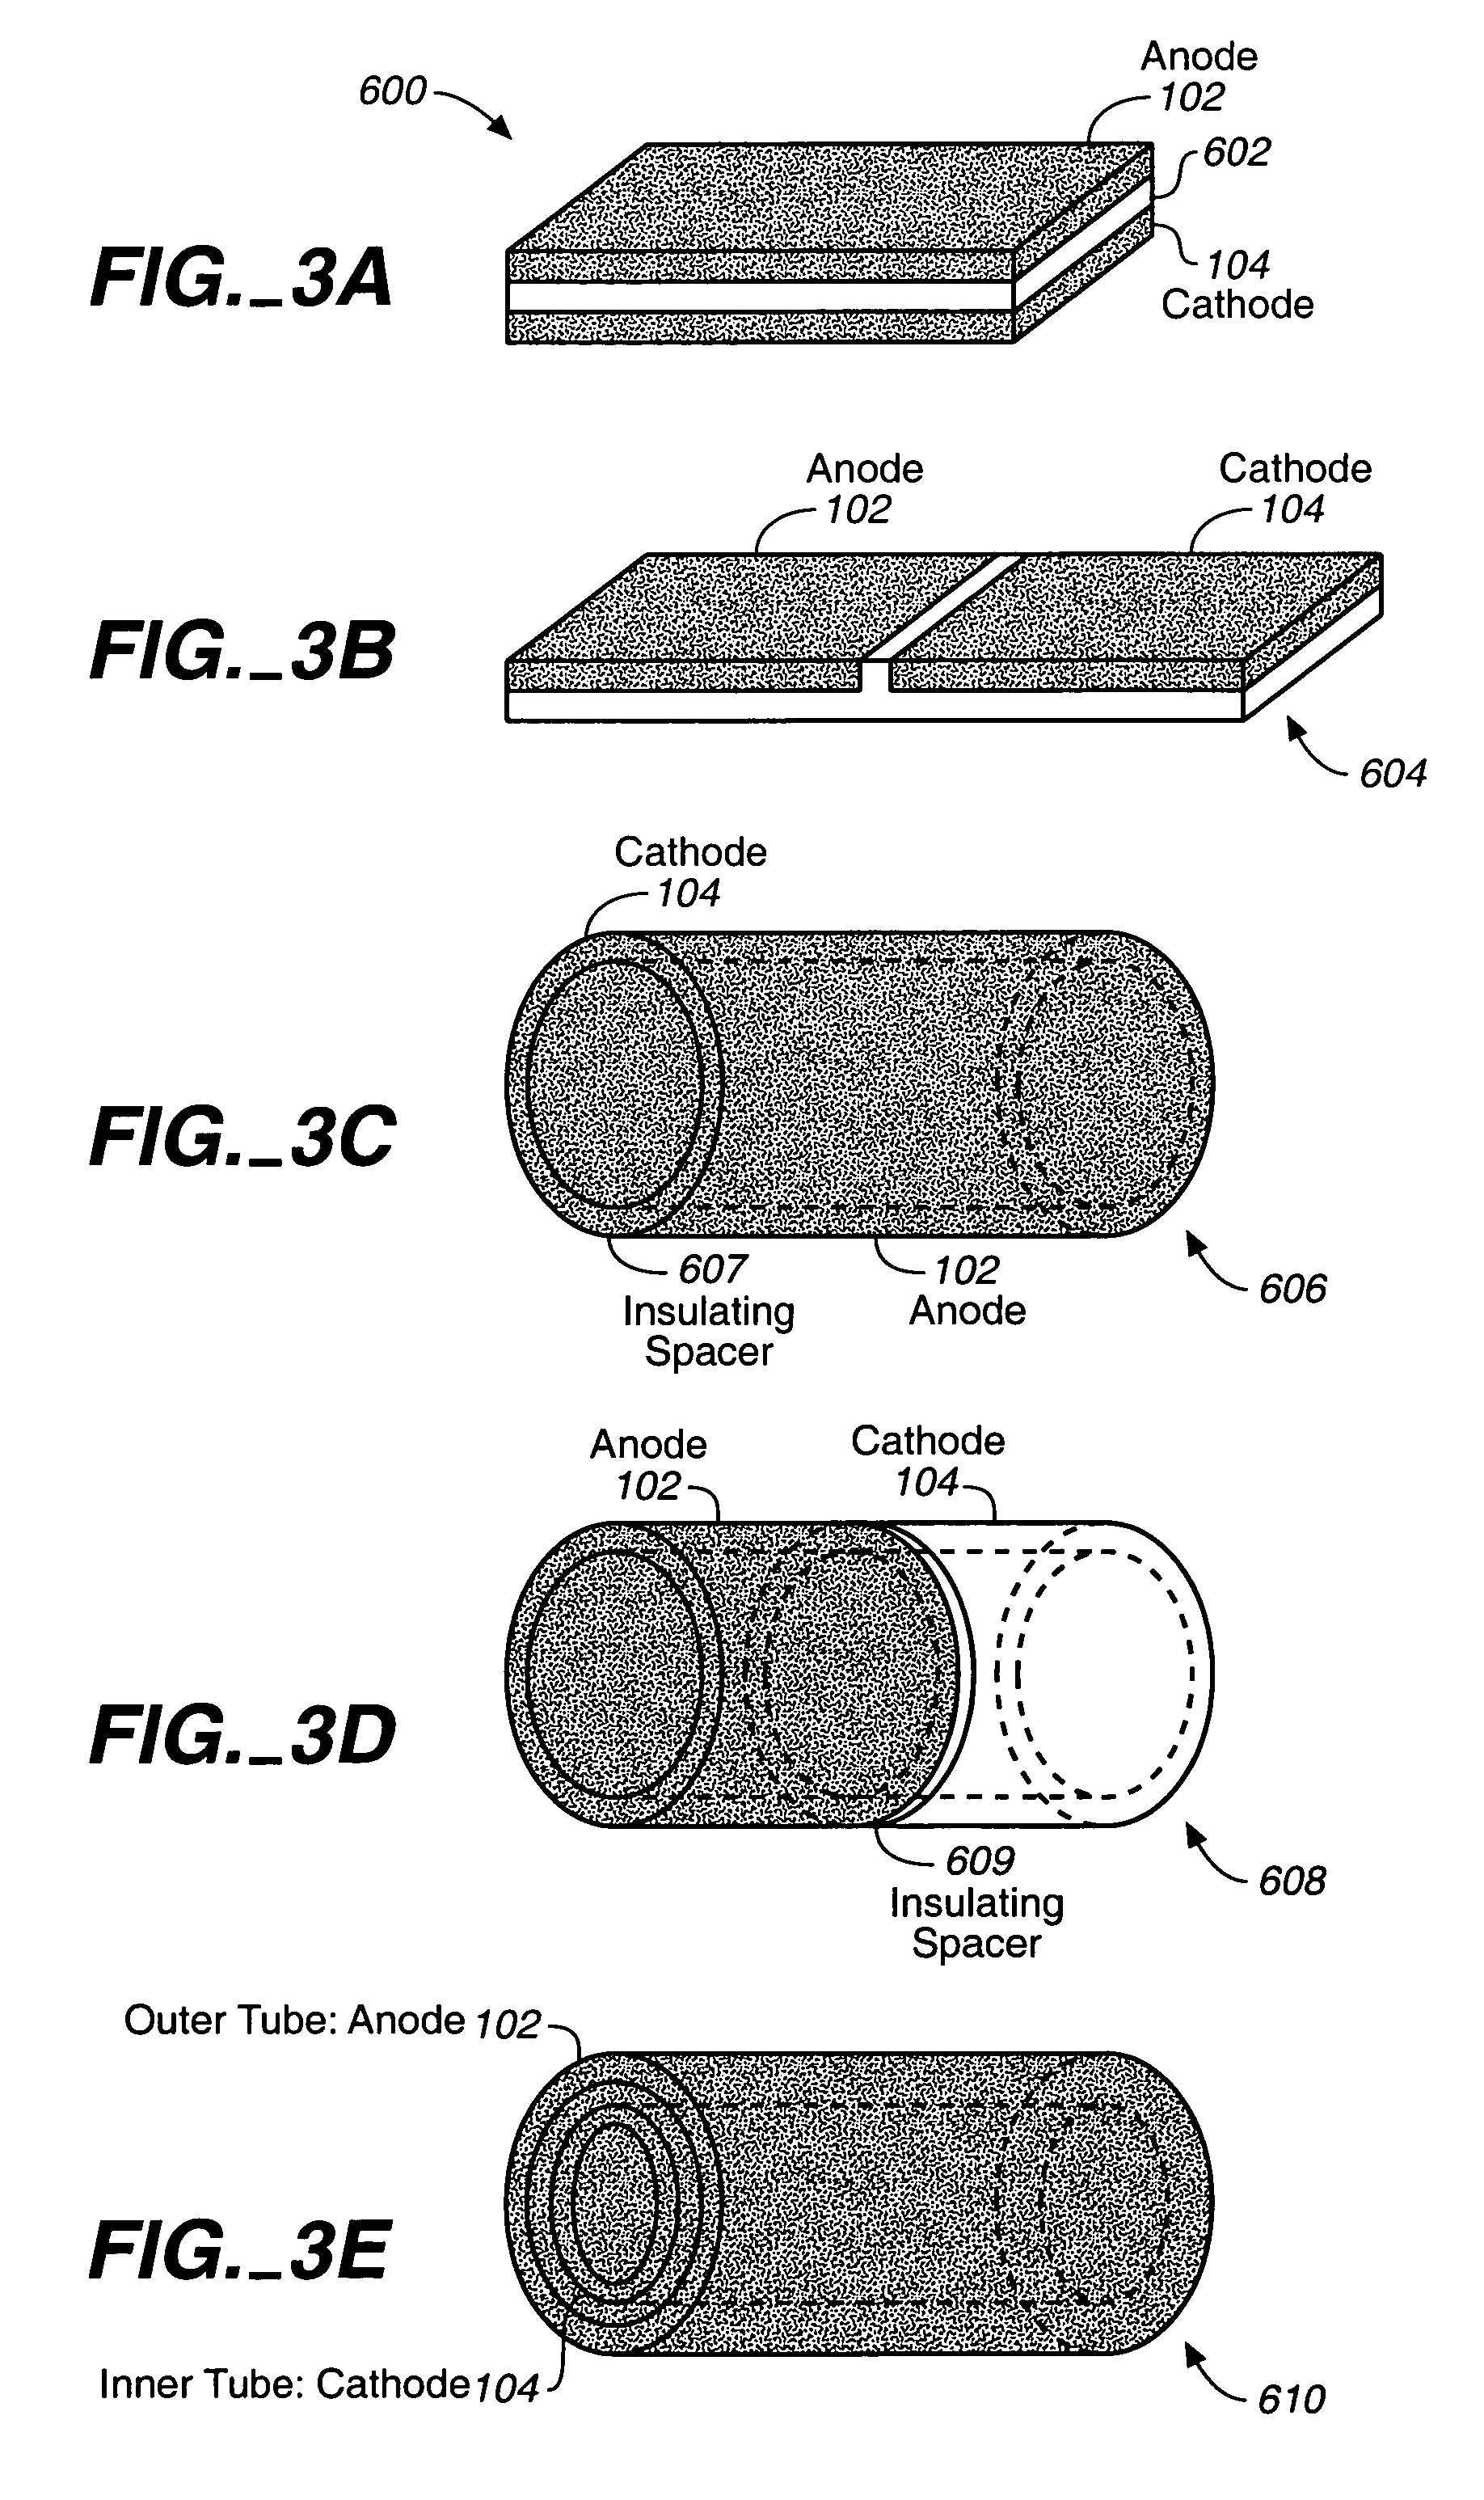 Miniature biological fuel cell that is operational under physiological conditions, and associated devices and methods